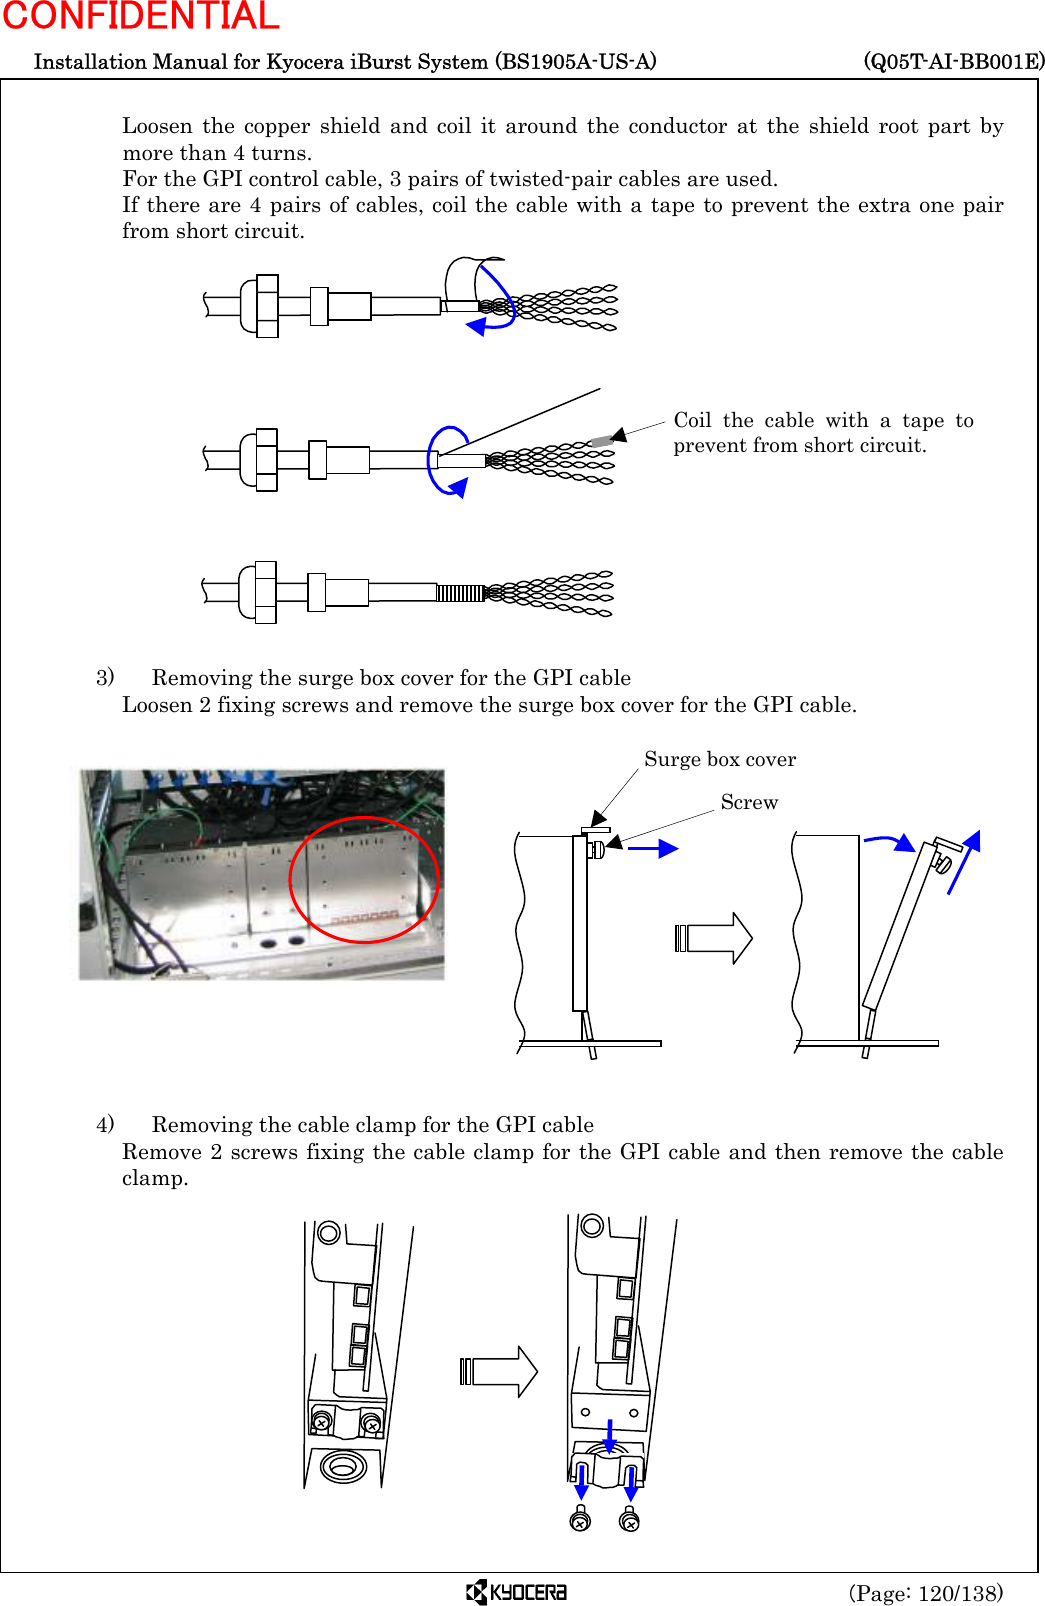  Installation Manual for Kyocera iBurst System (BS1905A-US-A)     (Q05T-AI-BB001E) (Page: 120/138) CONFIDENTIAL  Loosen the copper shield and coil it around the conductor at the shield root part by more than 4 turns. For the GPI control cable, 3 pairs of twisted-pair cables are used. If there are 4 pairs of cables, coil the cable with a tape to prevent the extra one pair from short circuit.                 3)    Removing the surge box cover for the GPI cable Loosen 2 fixing screws and remove the surge box cover for the GPI cable.                4)    Removing the cable clamp for the GPI cable Remove 2 screws fixing the cable clamp for the GPI cable and then remove the cable clamp.              Coil the cable with a tape toprevent from short circuit. Surge box cover  Screw 